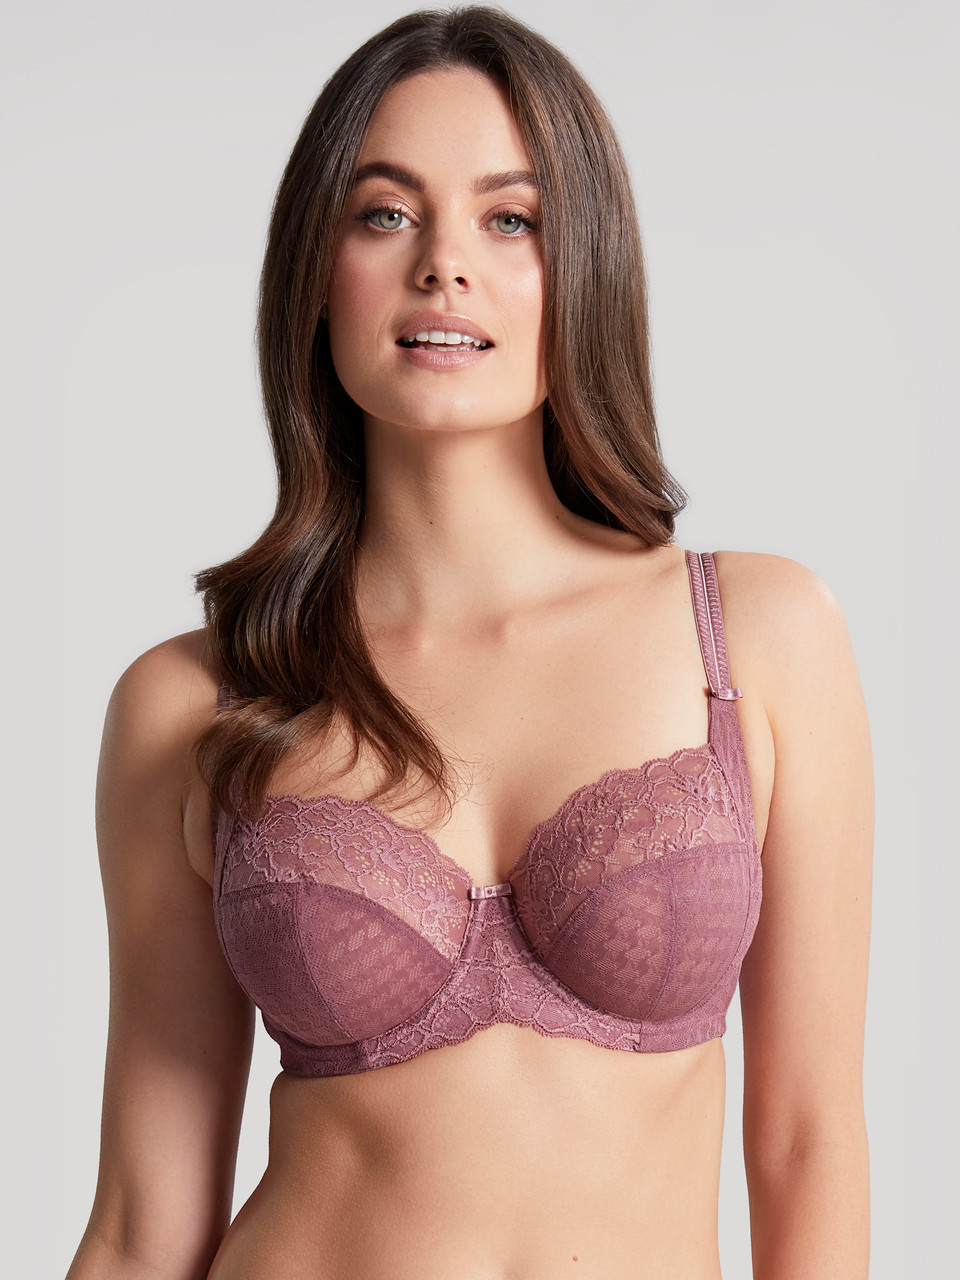 Comparing a 38E with 32G in Panache Envy Balconnet Bra (7285)